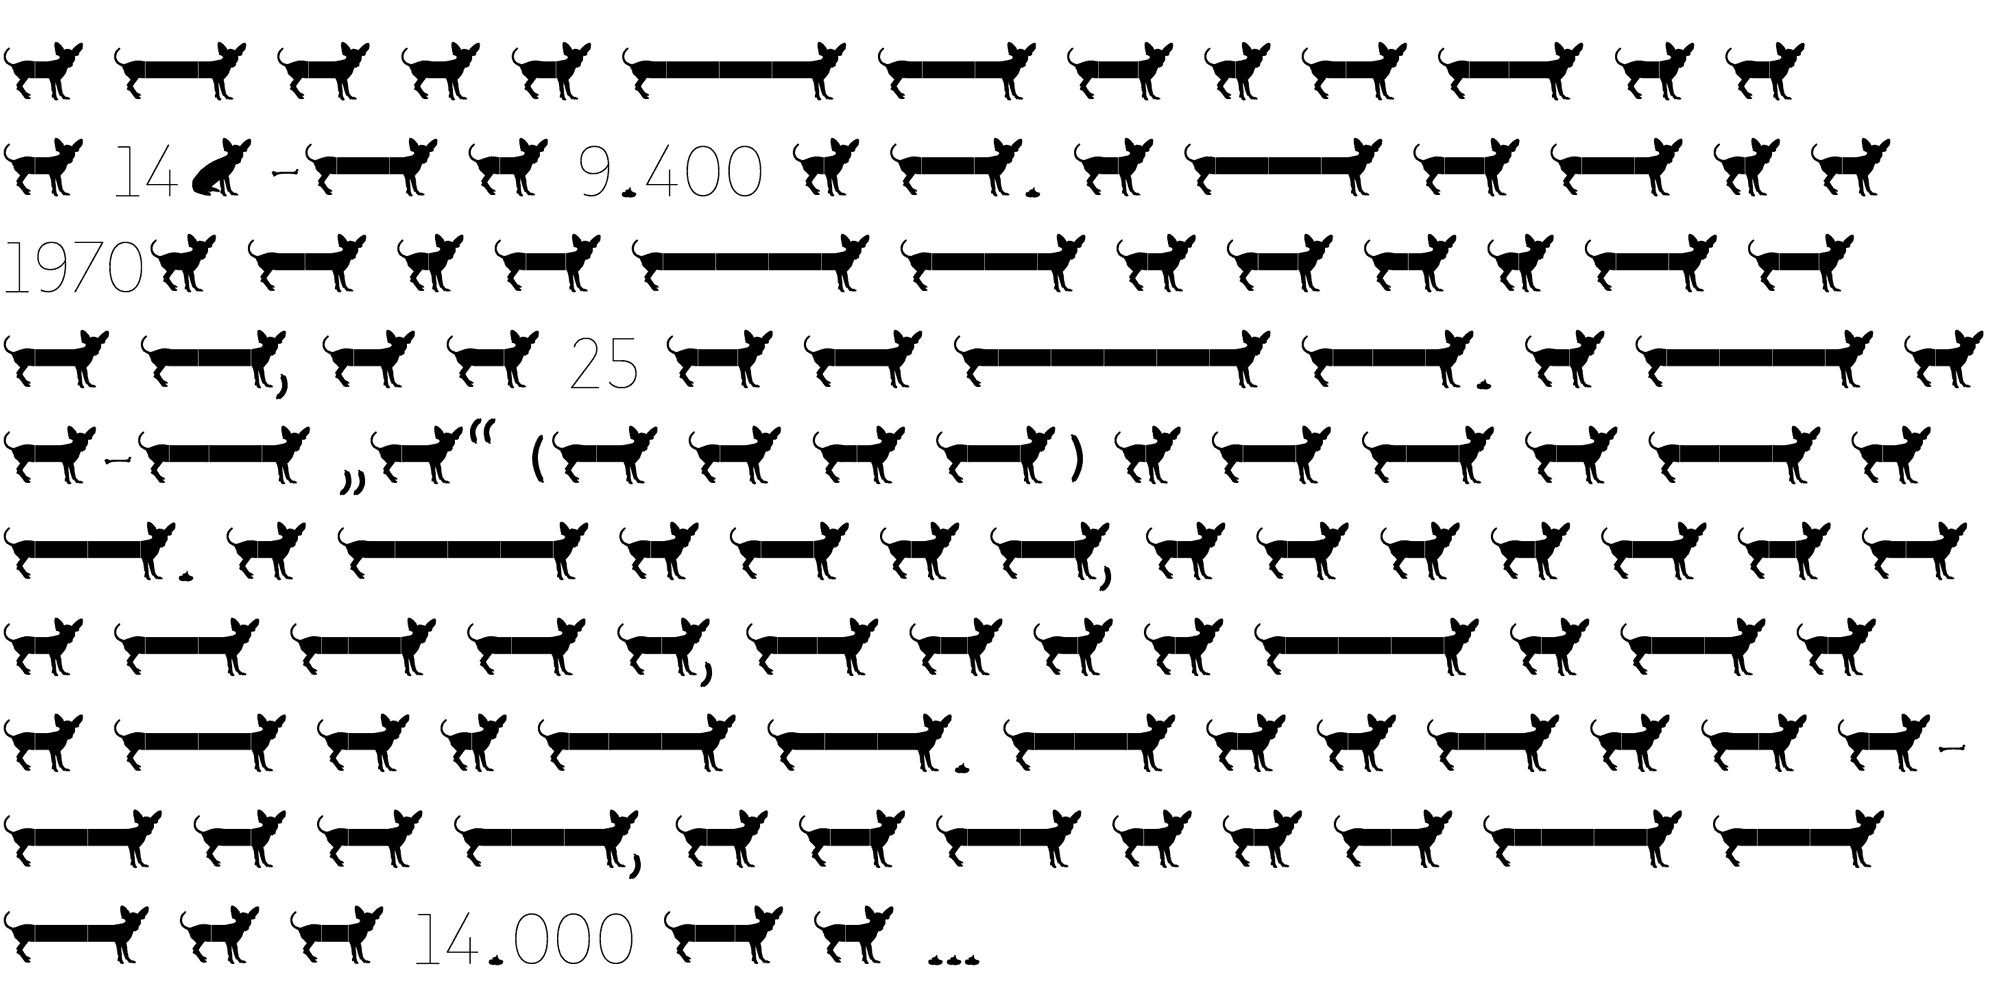 Sample paragraph of the Doggy chihuahua font style